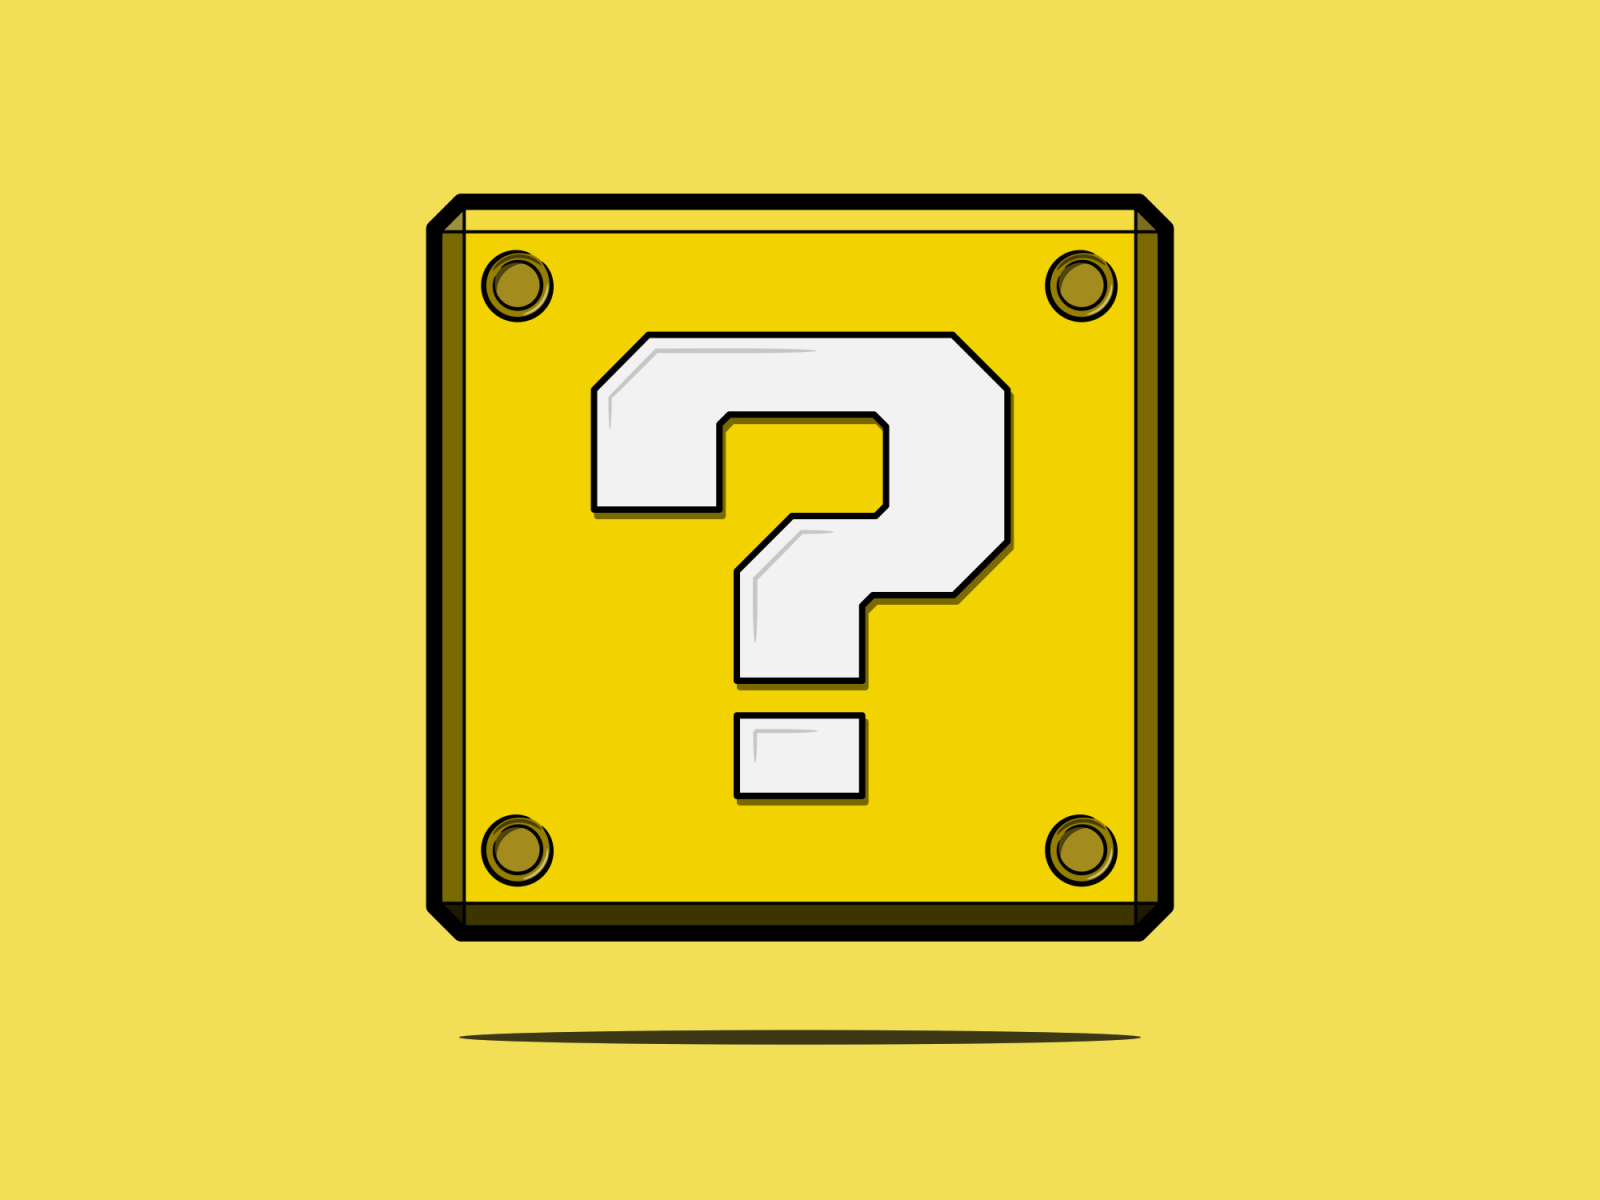 0 Result Images of Mario Question Mark Block Coloring Page - PNG Image ...